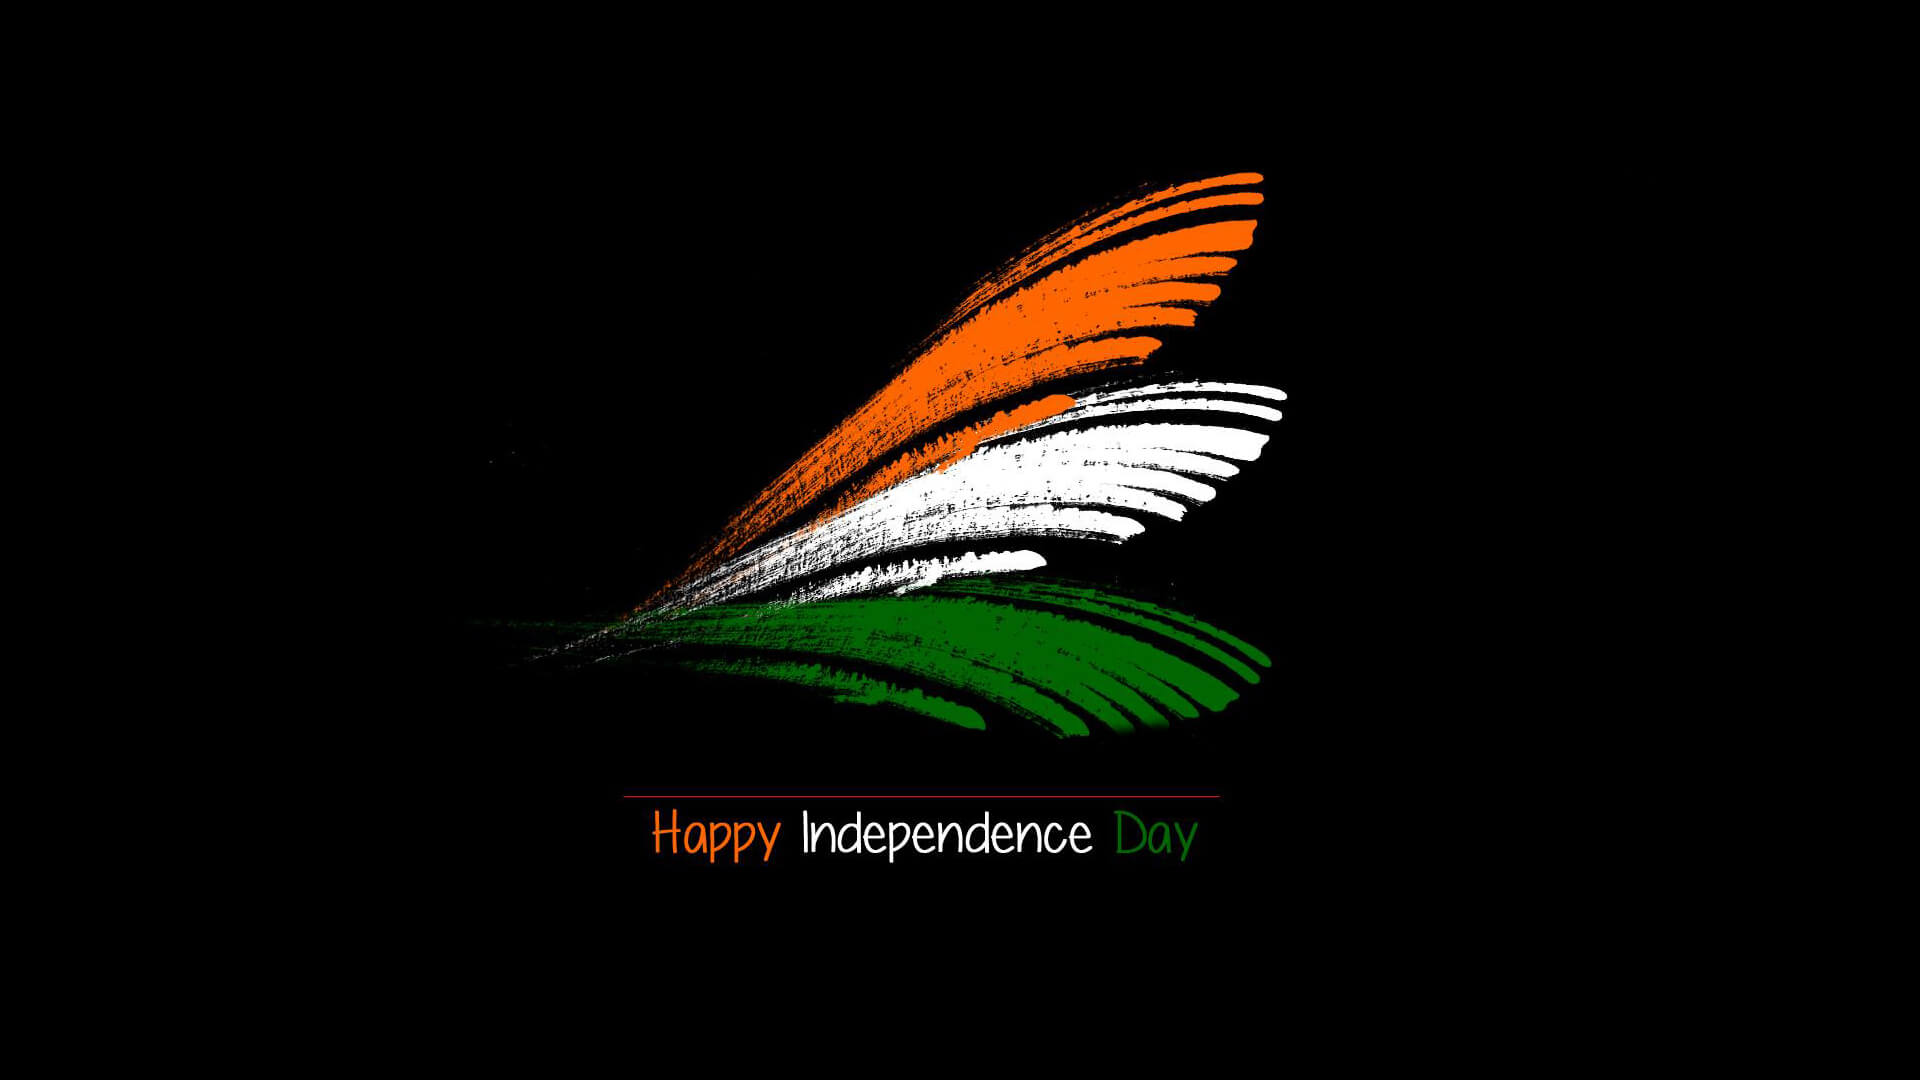 Patriotic Wallpapers And Greetings Independence Day - Indian Flag Black  Background - 1920x1080 Wallpaper 